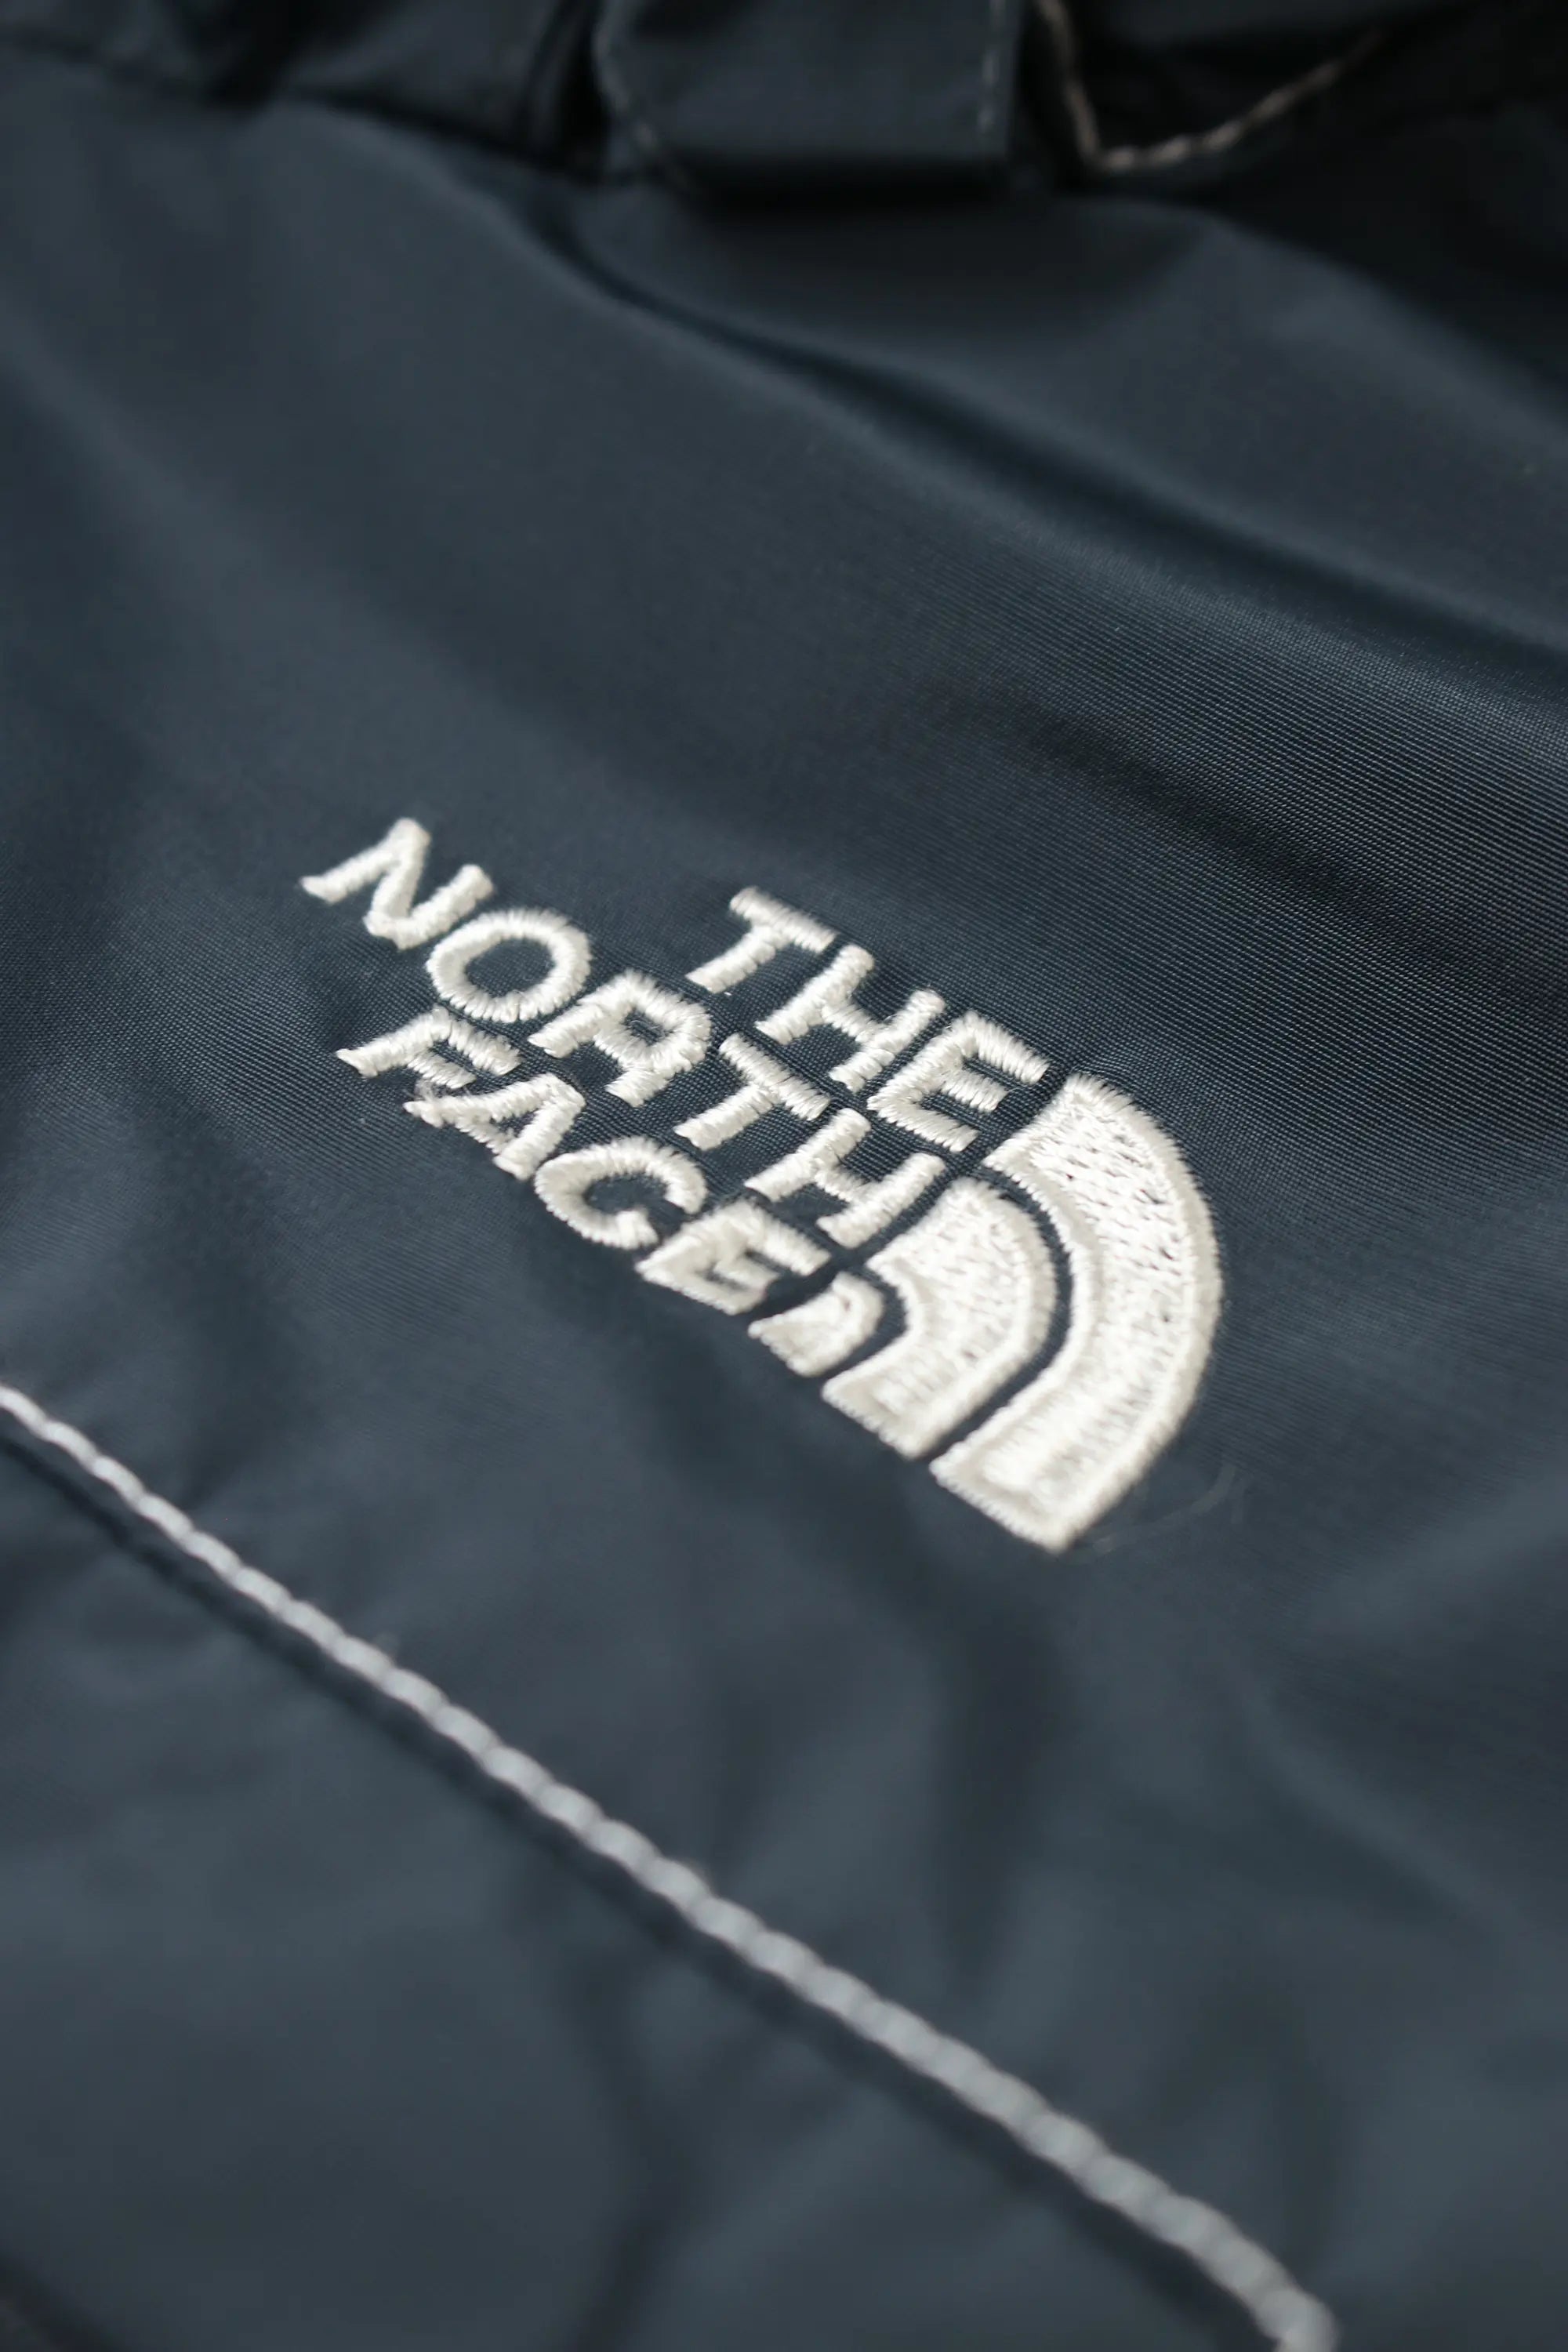 North Face 600 HyVent (w)